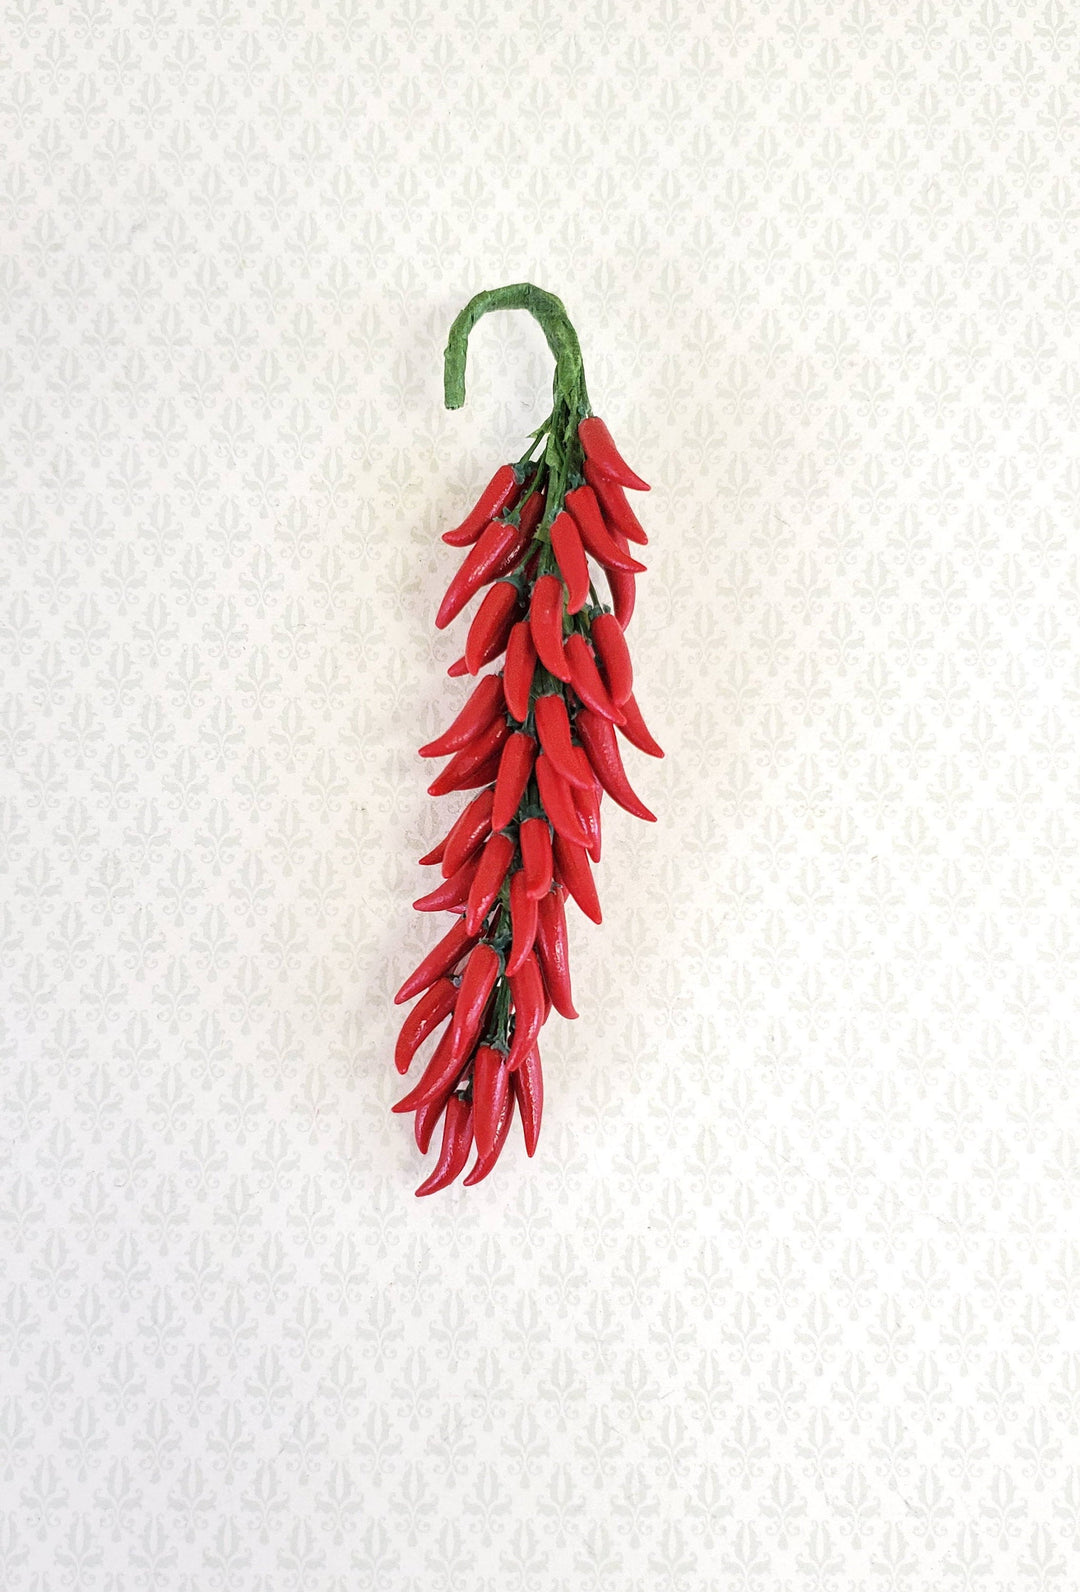 Dollhouse Red Chile Ristra 1:6 Scale Miniature 3.5" tall Decoration